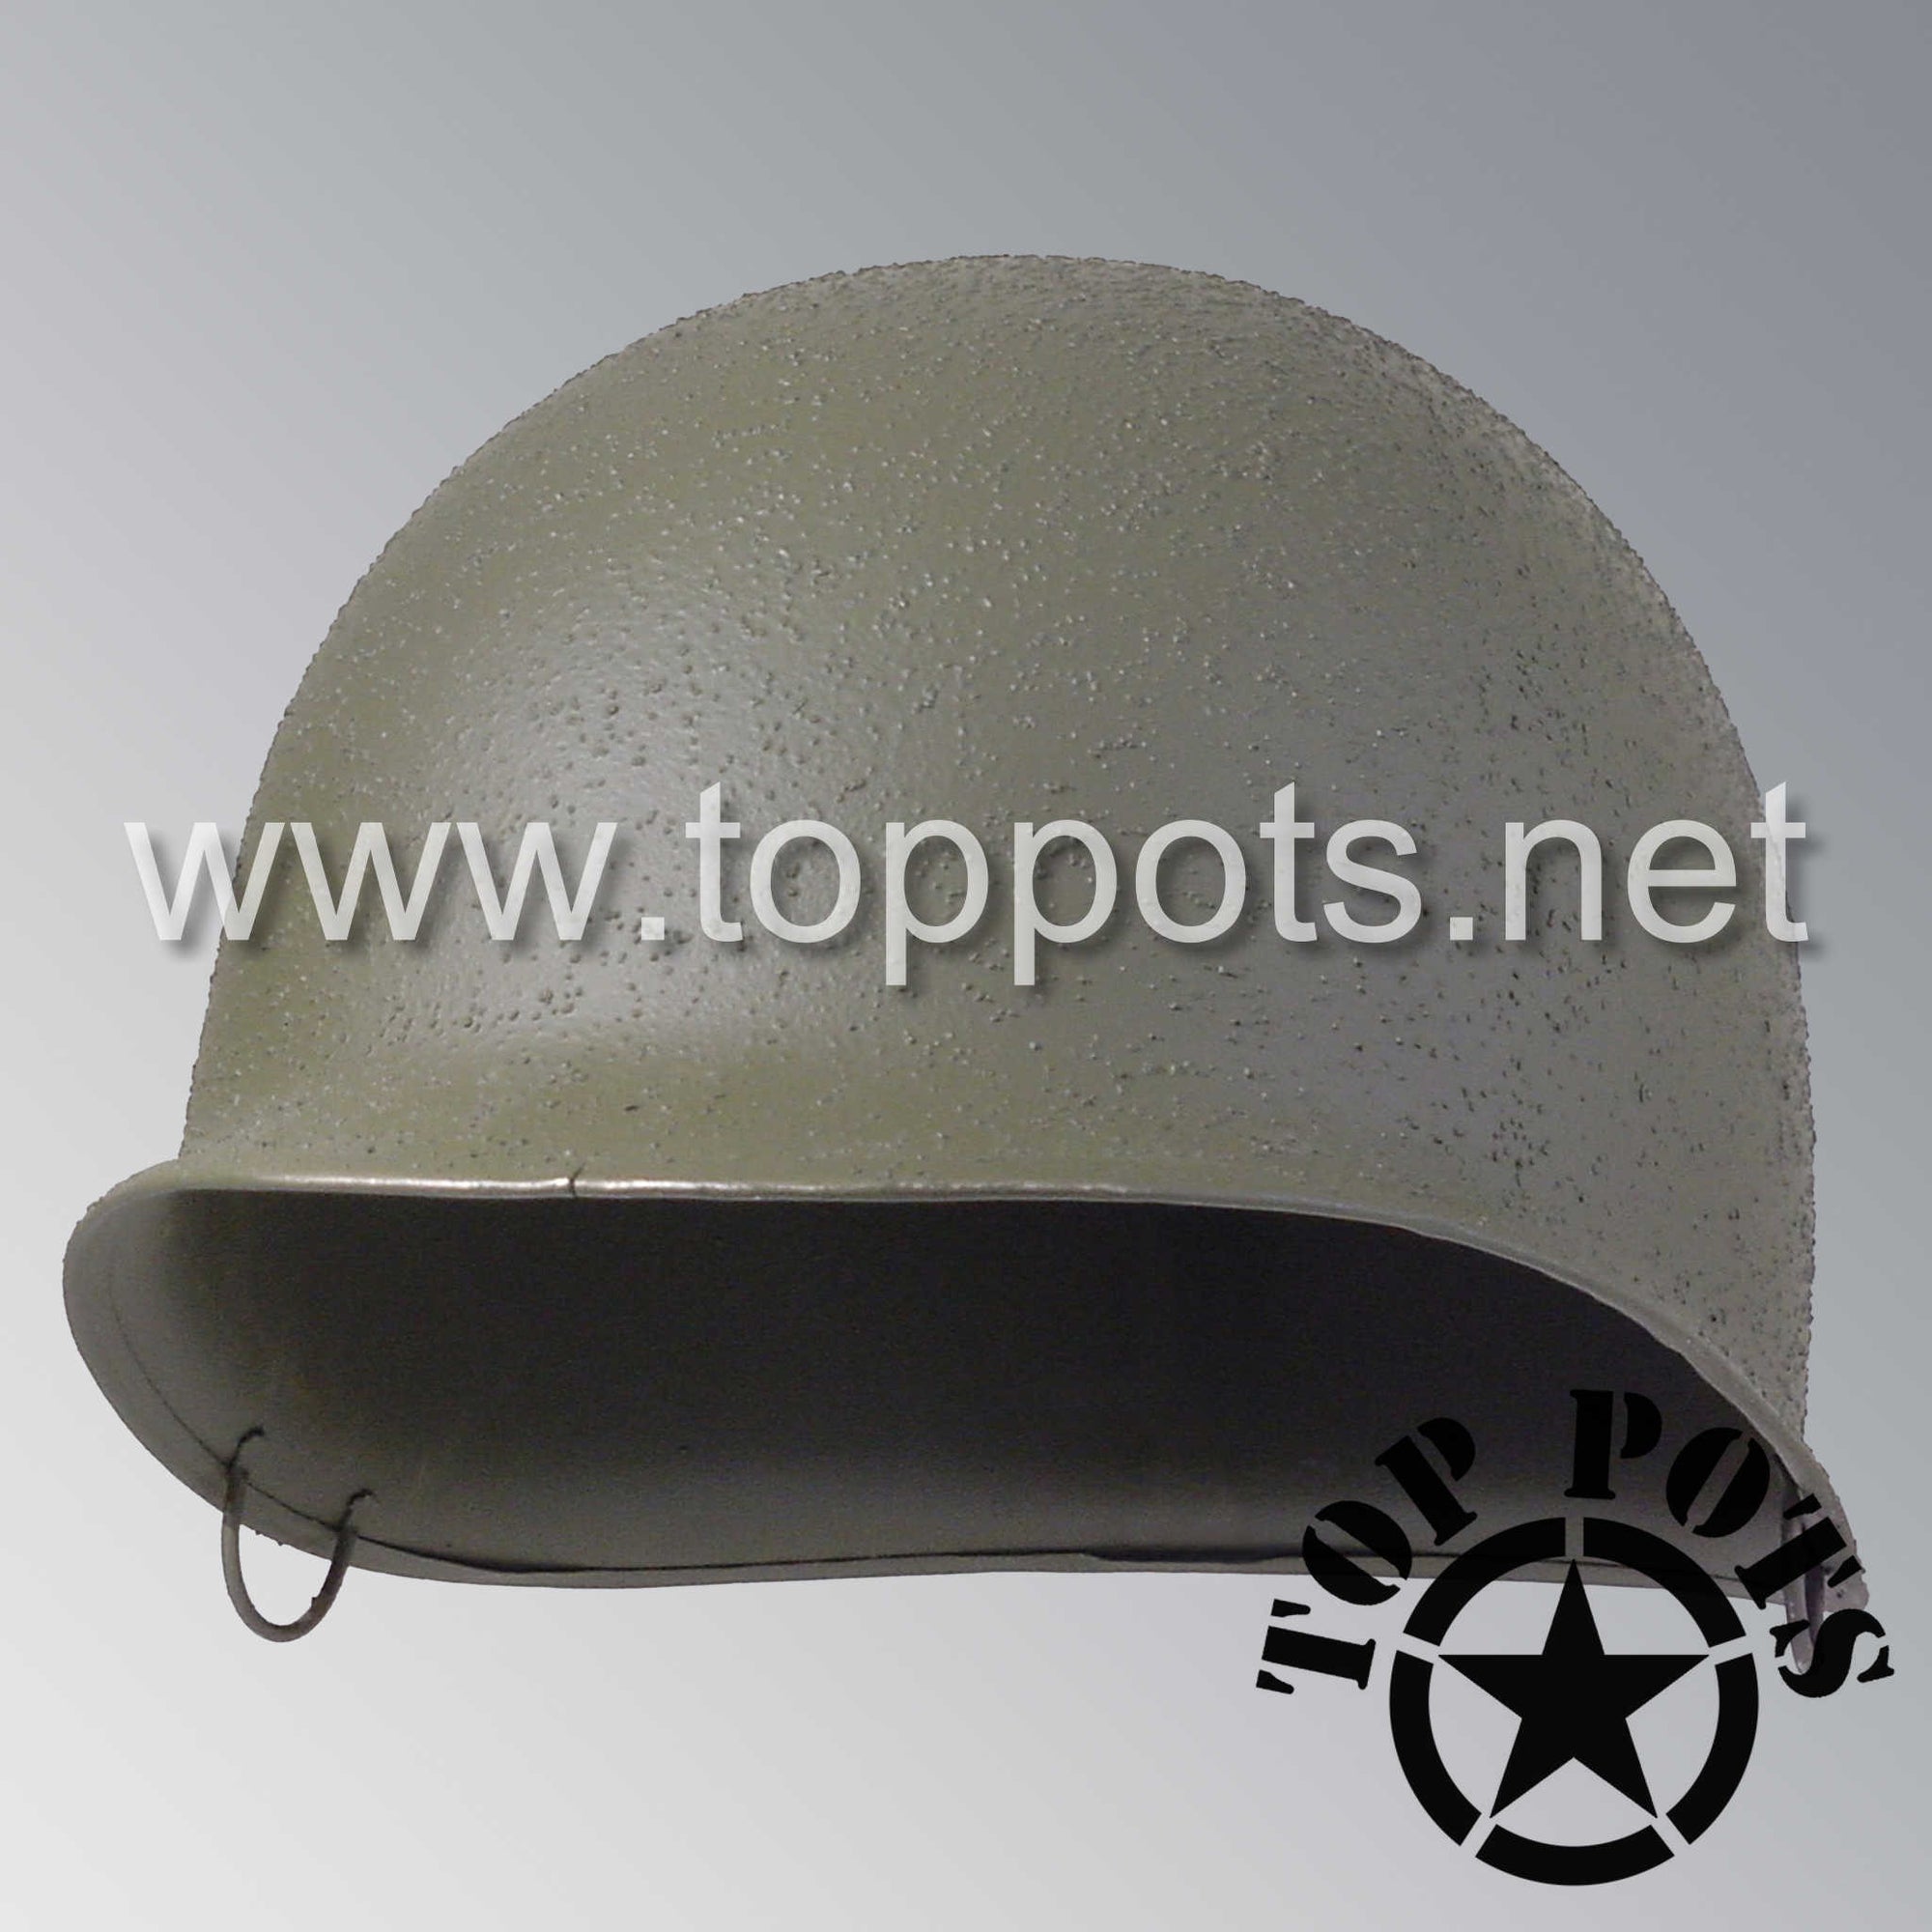 WWII US Army Restored Original M2 Paratrooper Airborne Helmet D Bale McCord Shell